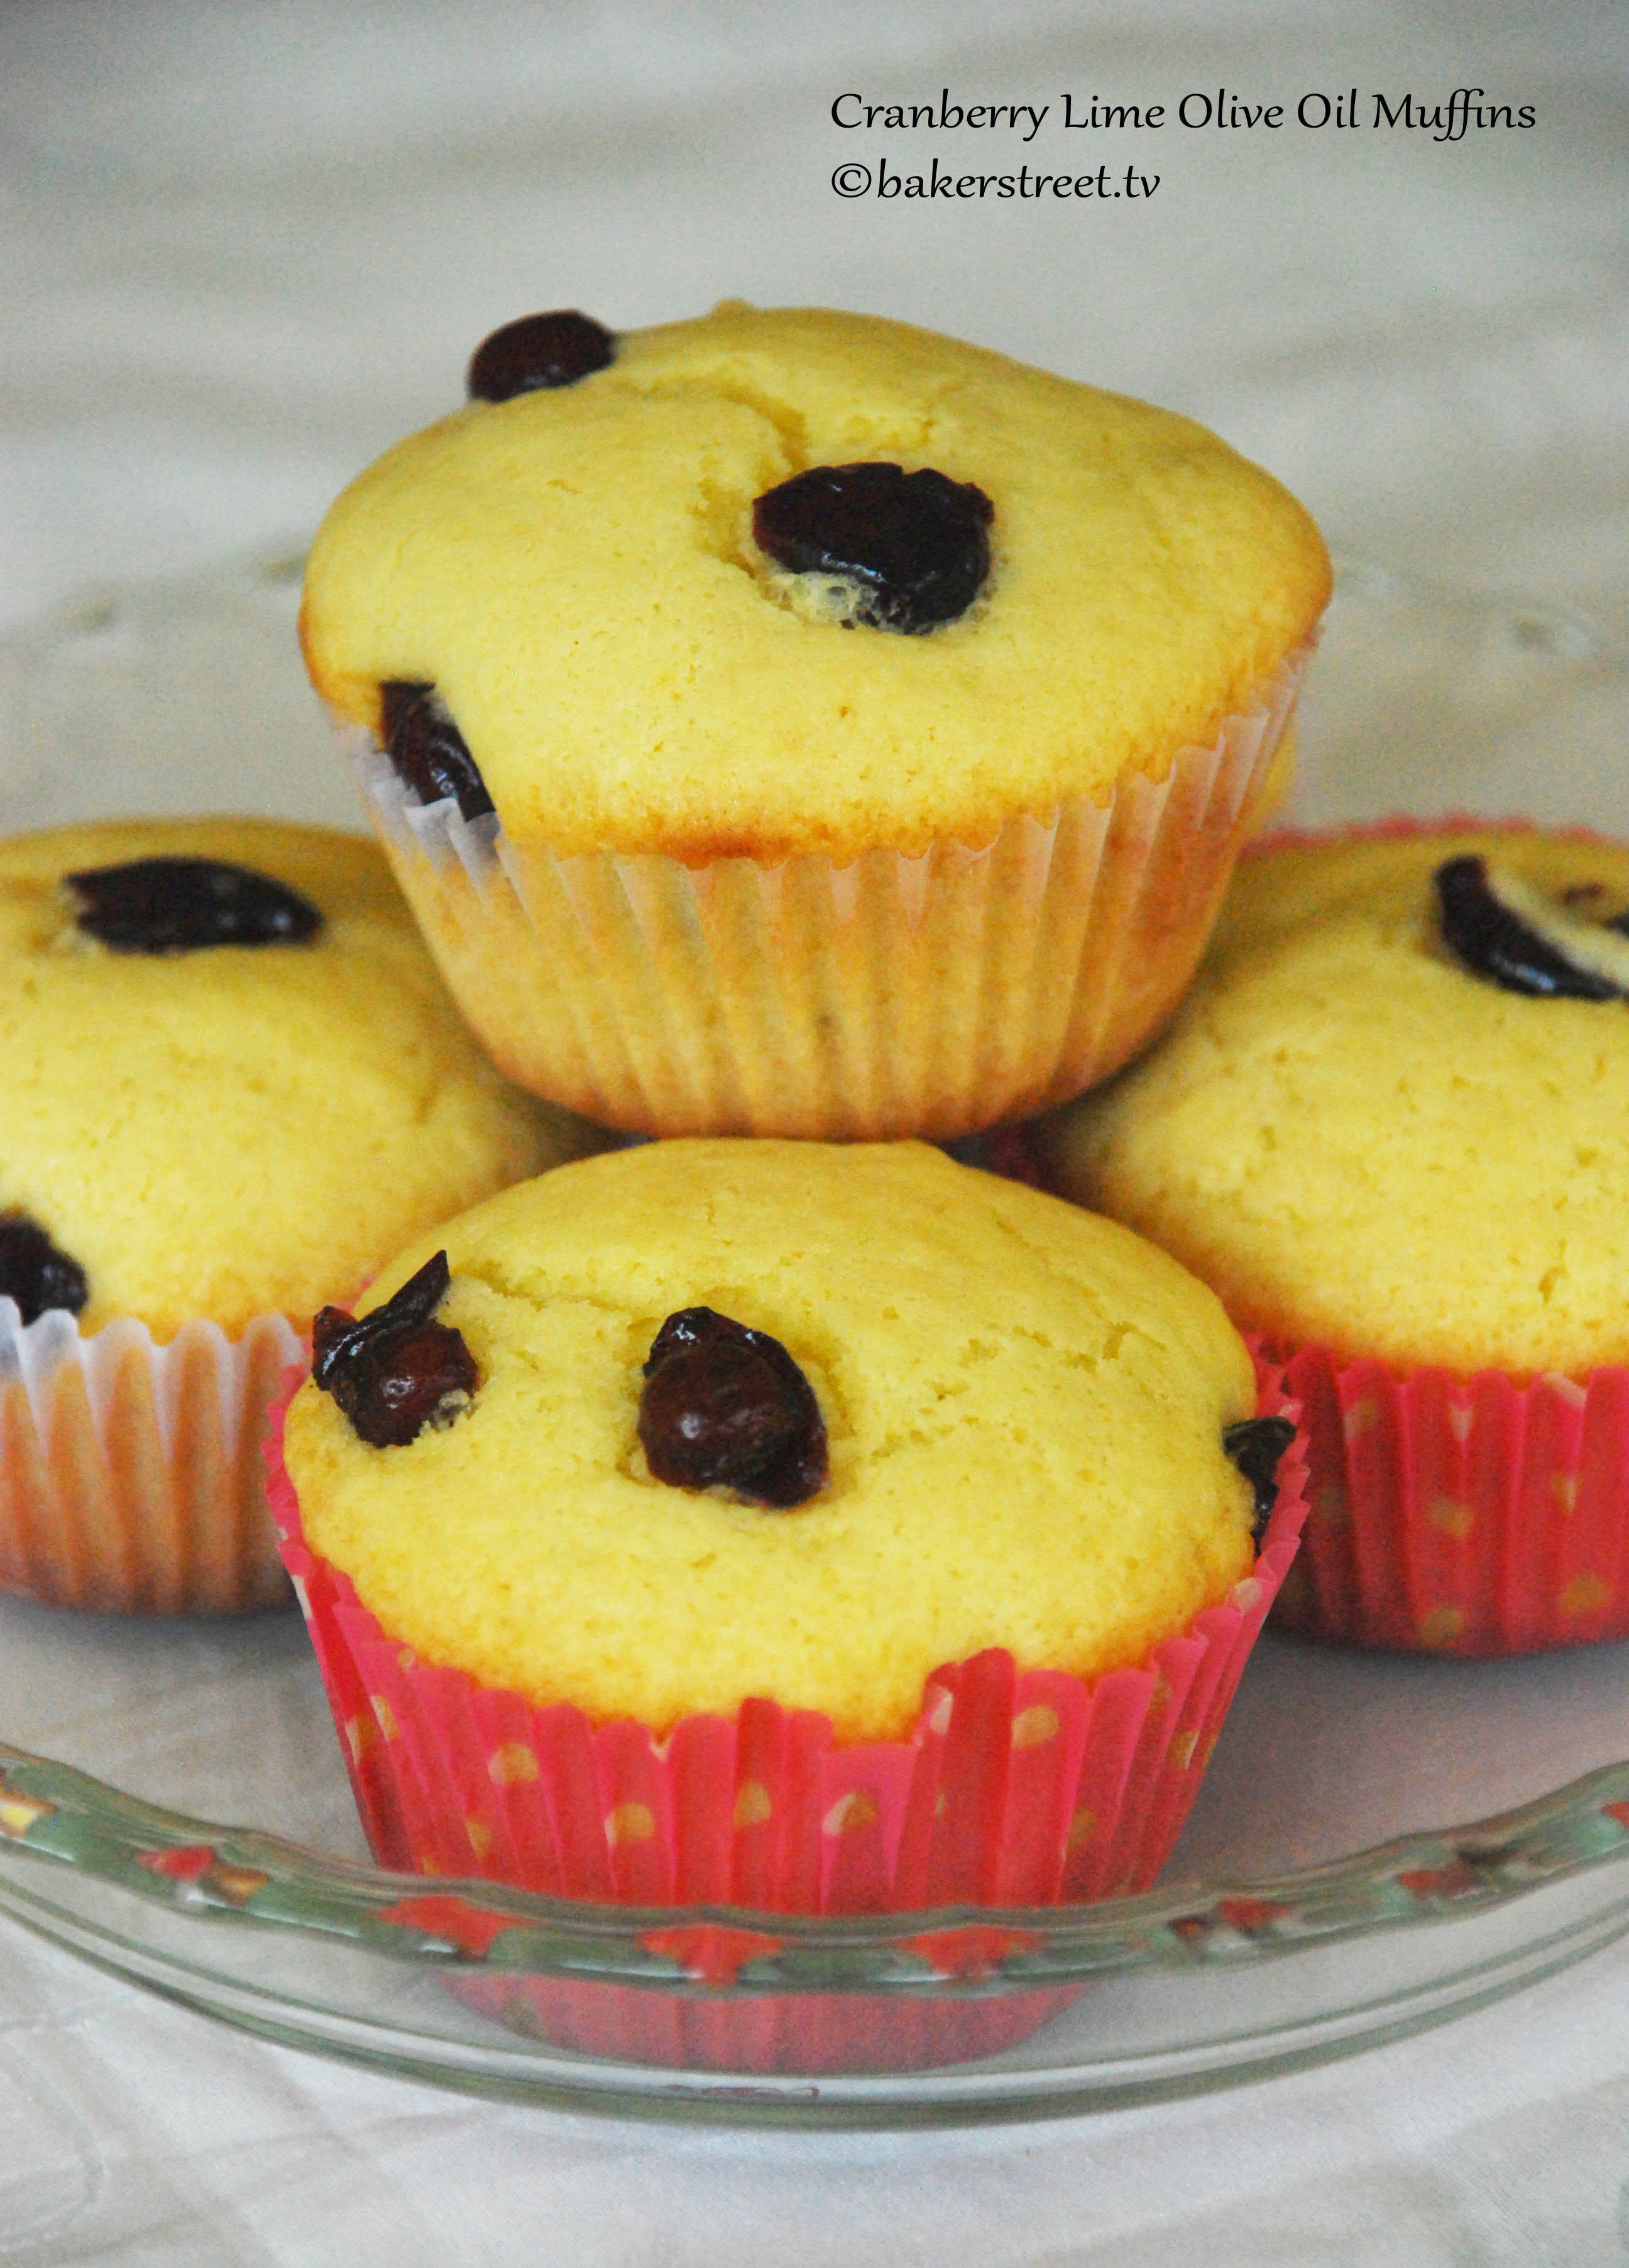 Cranberry Lime Olive Oil Muffin2 BS